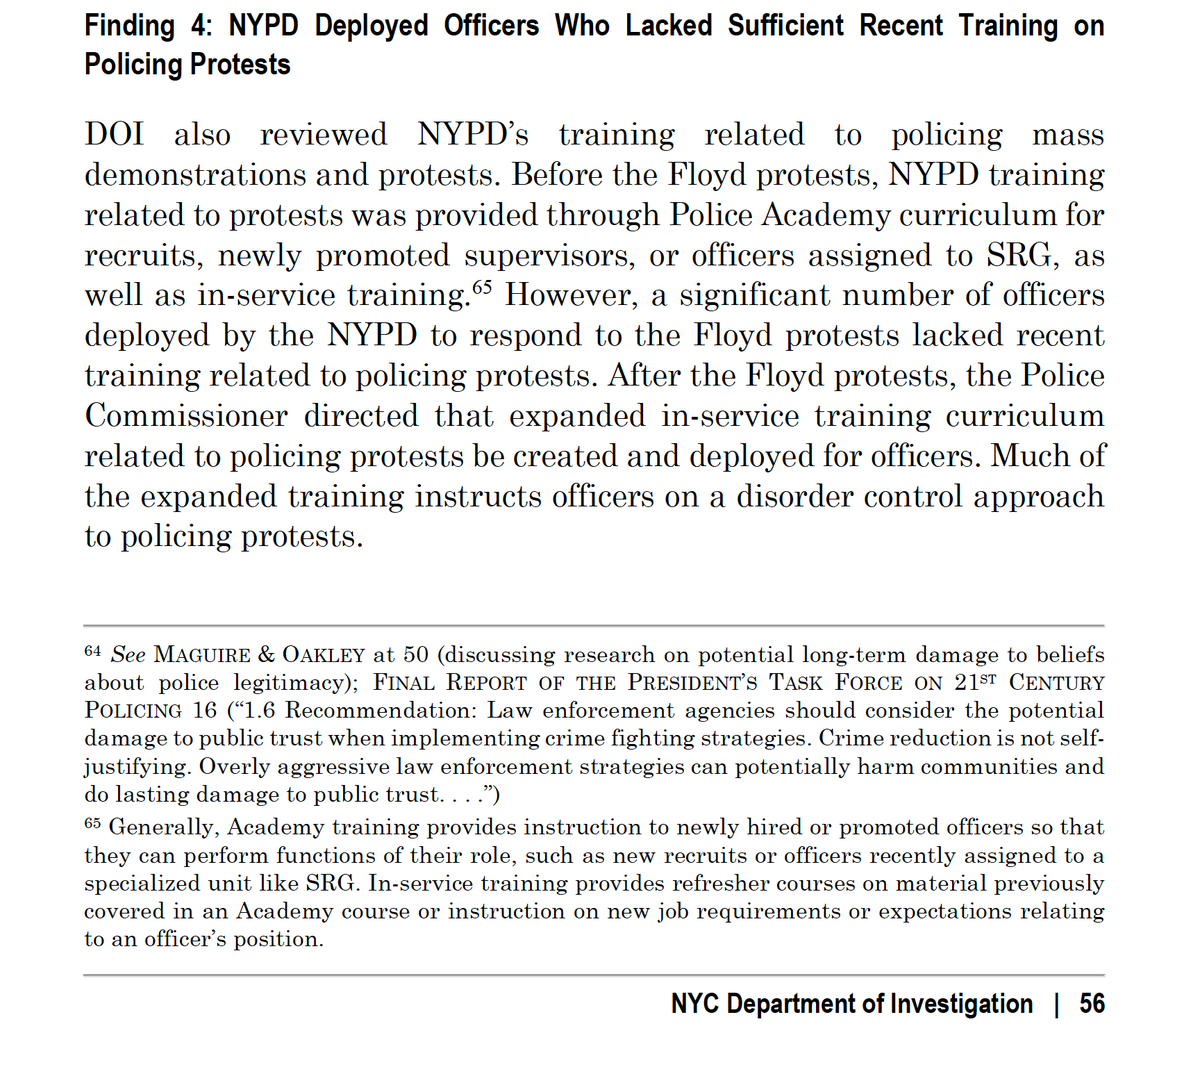 The point begins: There's NYPD Police Academy training for recruits and in-service training related to protest policing and disorder control, and "[m]uch of" even the "expanded training" given *after* the Floyd protests focuses on "a disorder control approach to policing" them